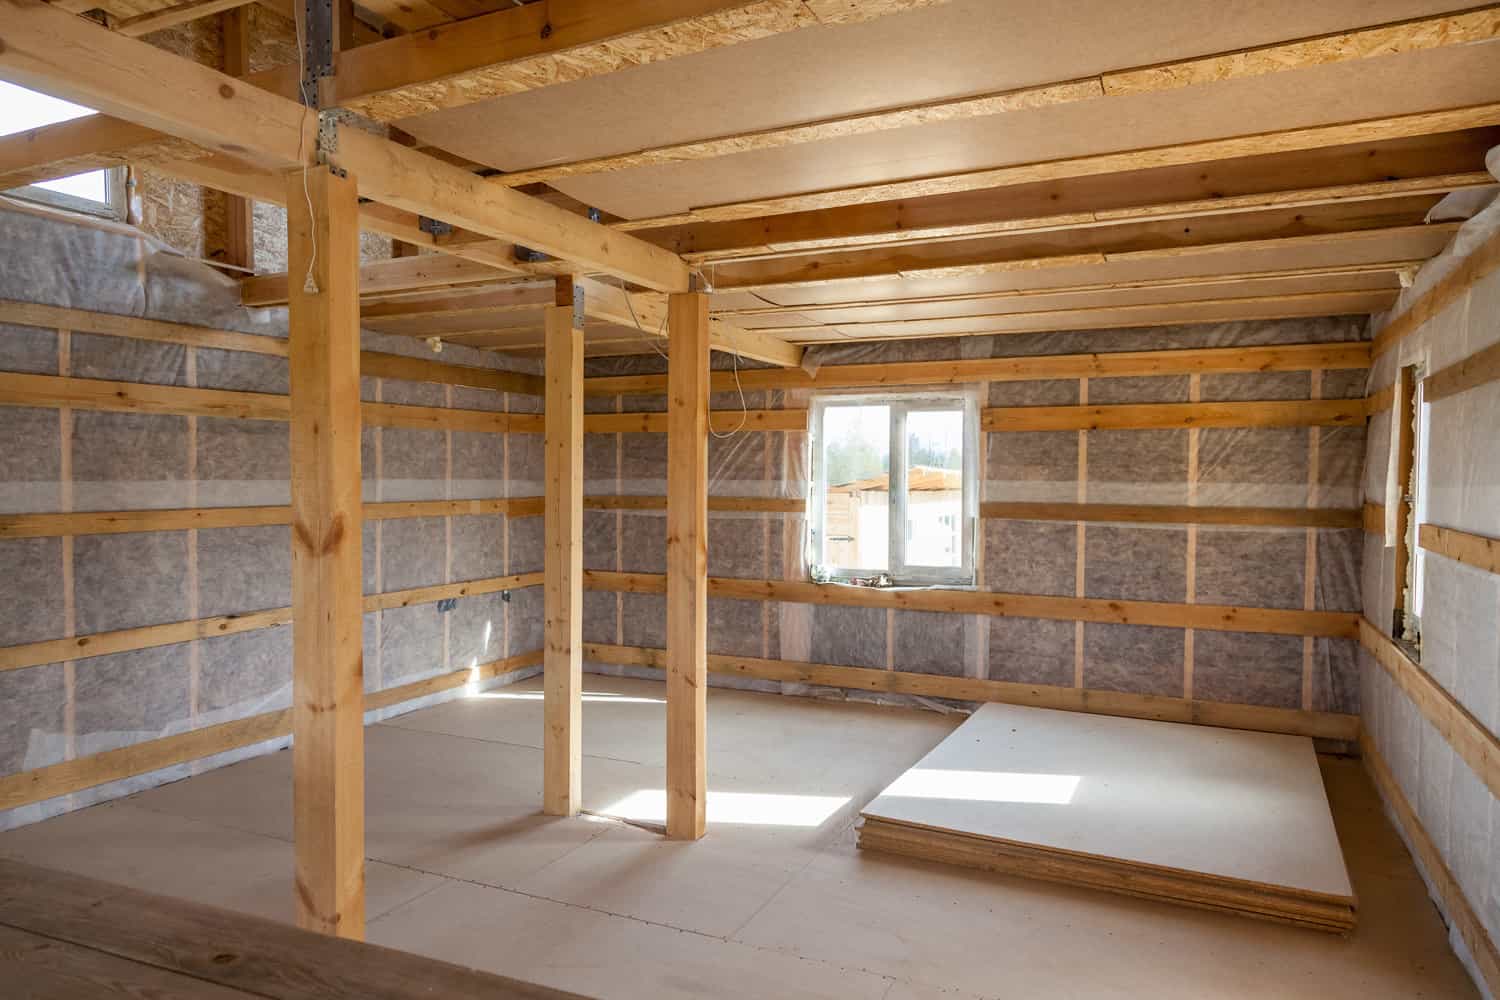 the interior of the frame house in process of construction village